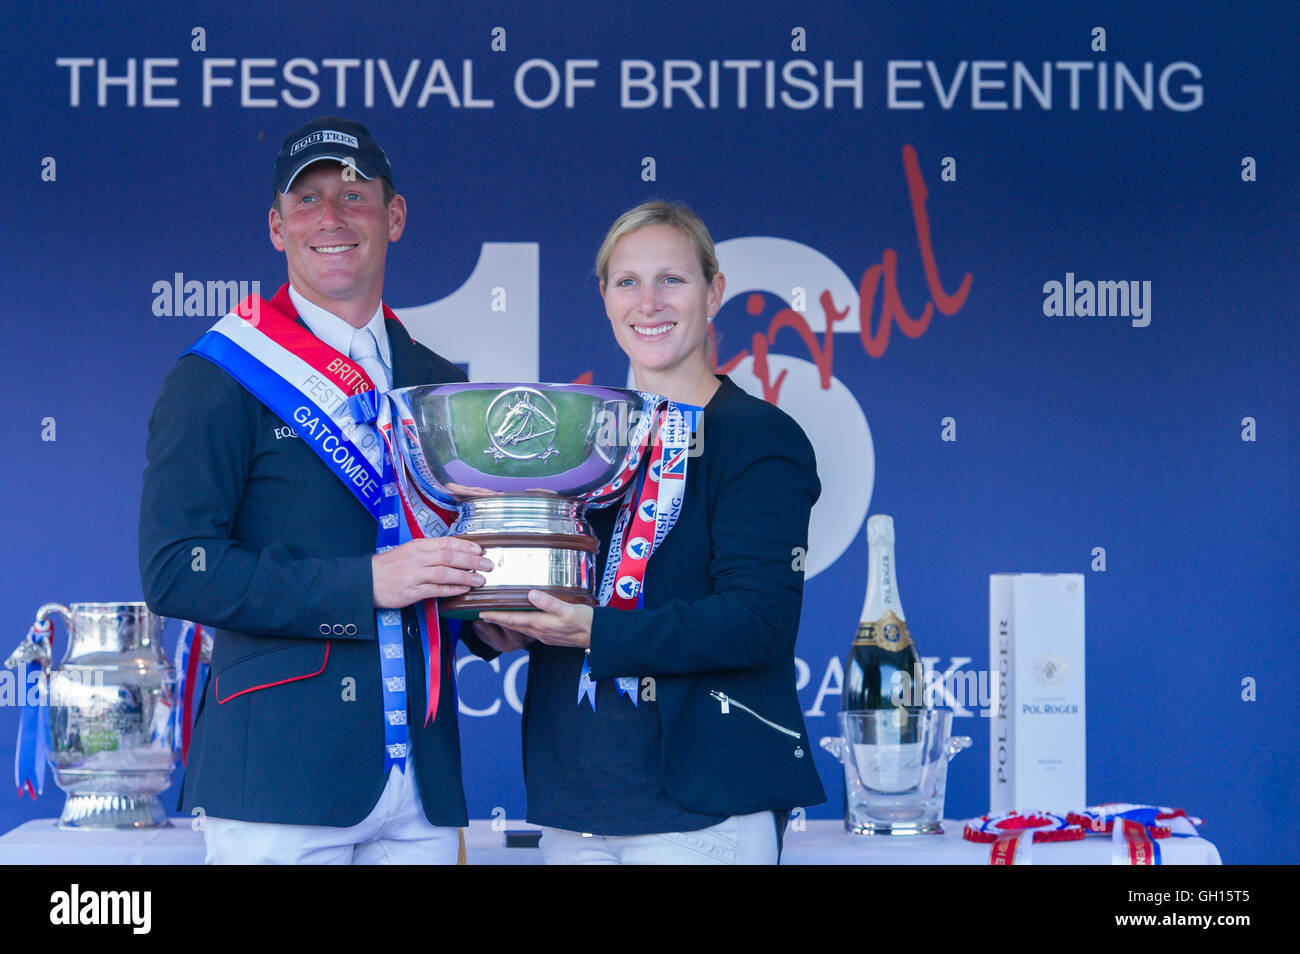 Festival of British Eventing, Gatcombe Park, Minchampton, Gloucestershire, England, 7th August 2016, Zara Tindall presents the Corinthian Cup to Winner  of the British Open Oliver Townend  Credit: Trevor Holt / Alamy Live News. Stock Photo